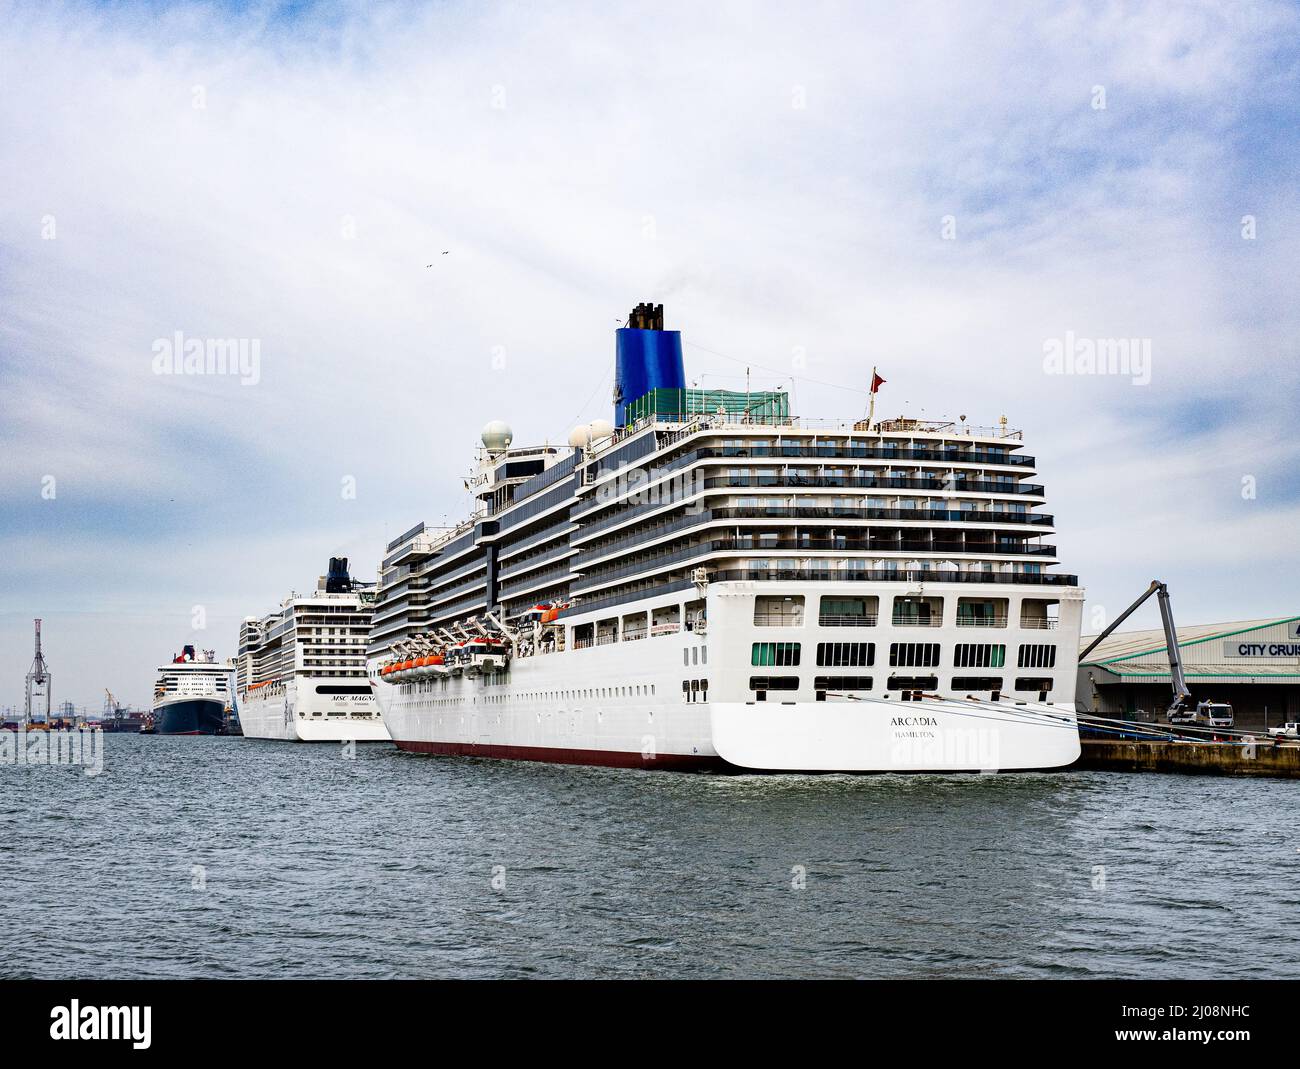 The 90,000 tonnes P&O cruise liner 'Arcadia' joins other cruise liners alongside in Southampton. Stock Photo